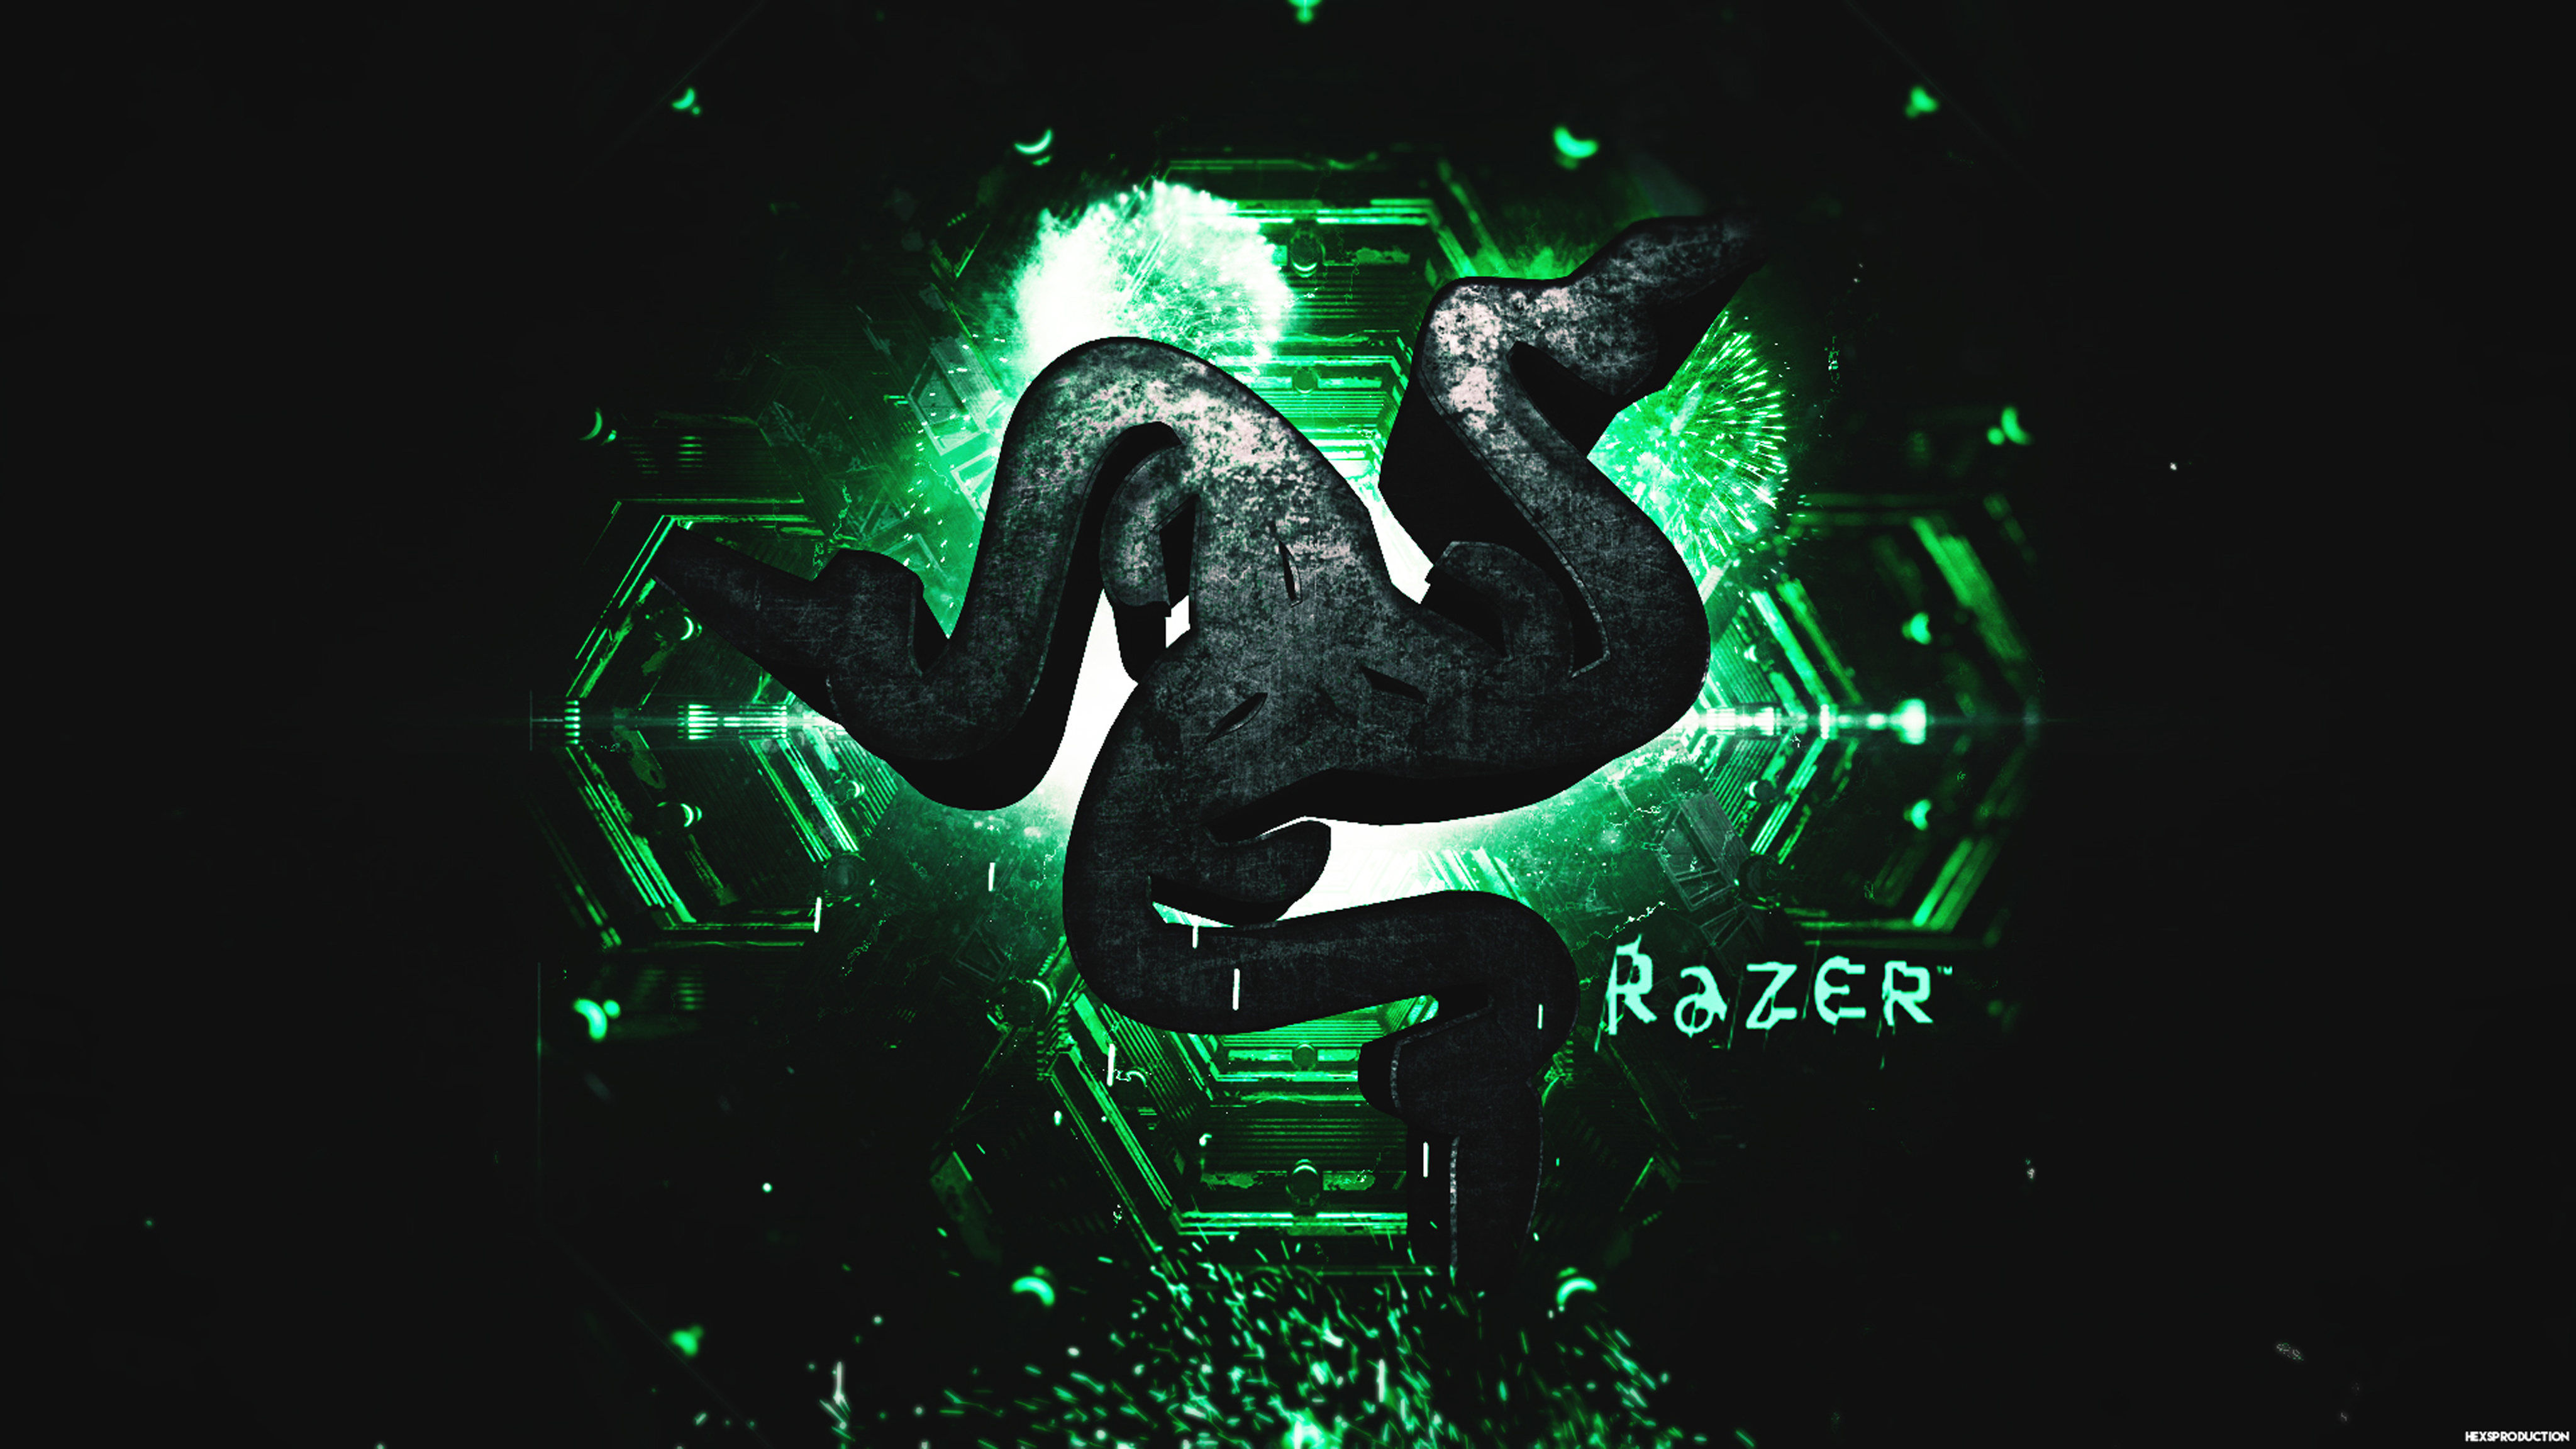  Razer  Wallpapers  Pictures Images